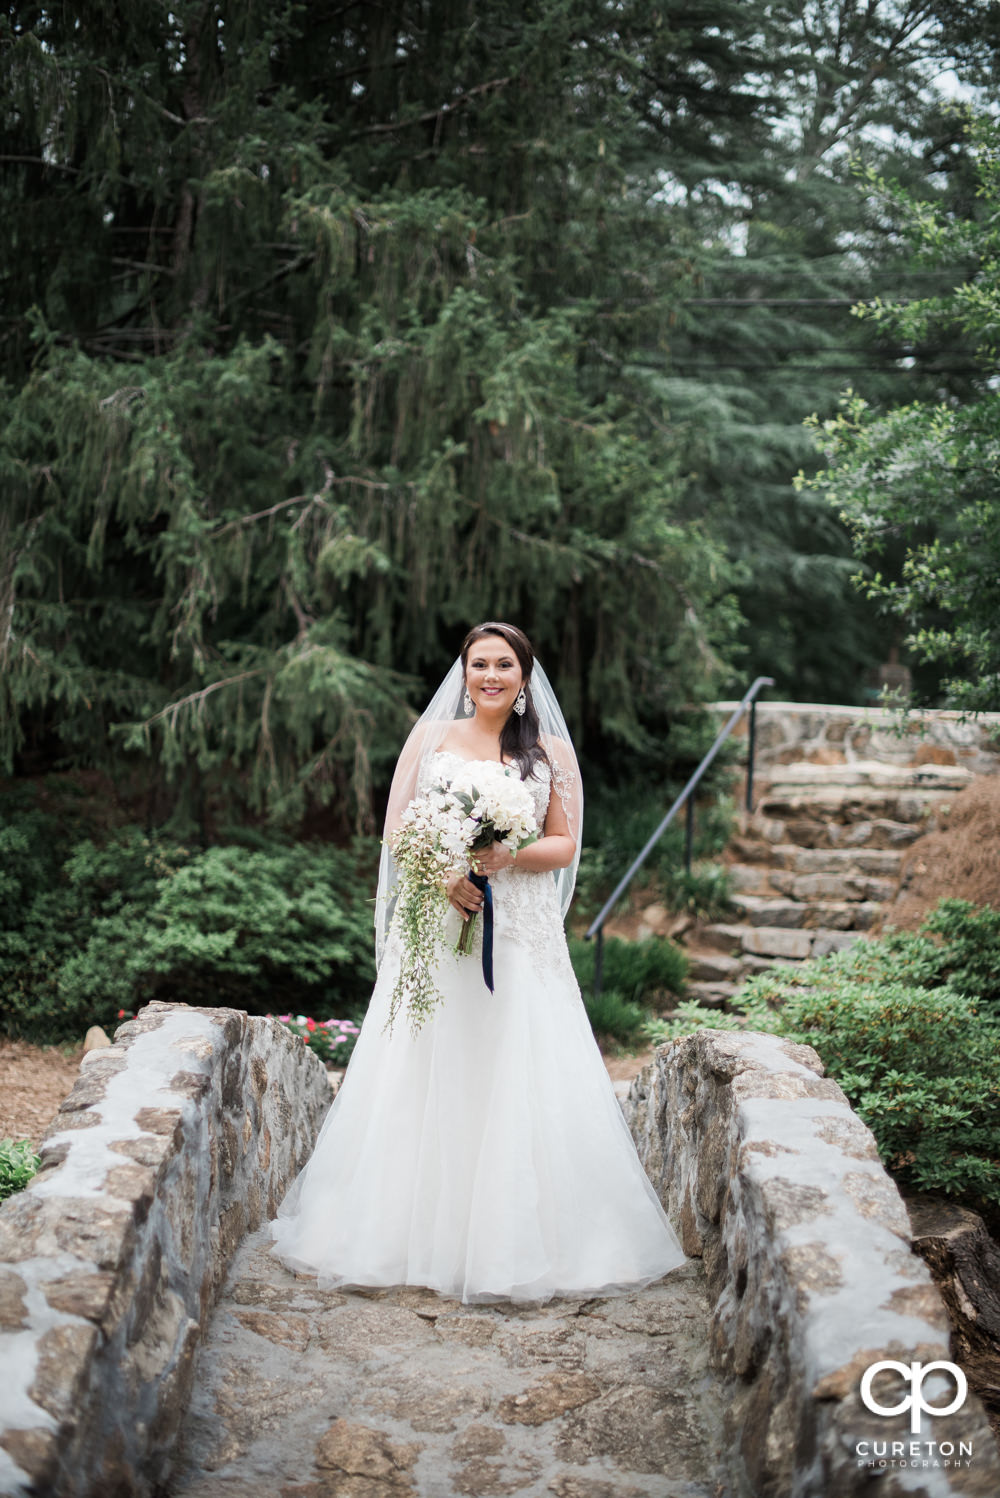 Bride standing on the stone bridge over the Reedy River at the Rock Quarry Garden in downtown Greenville.